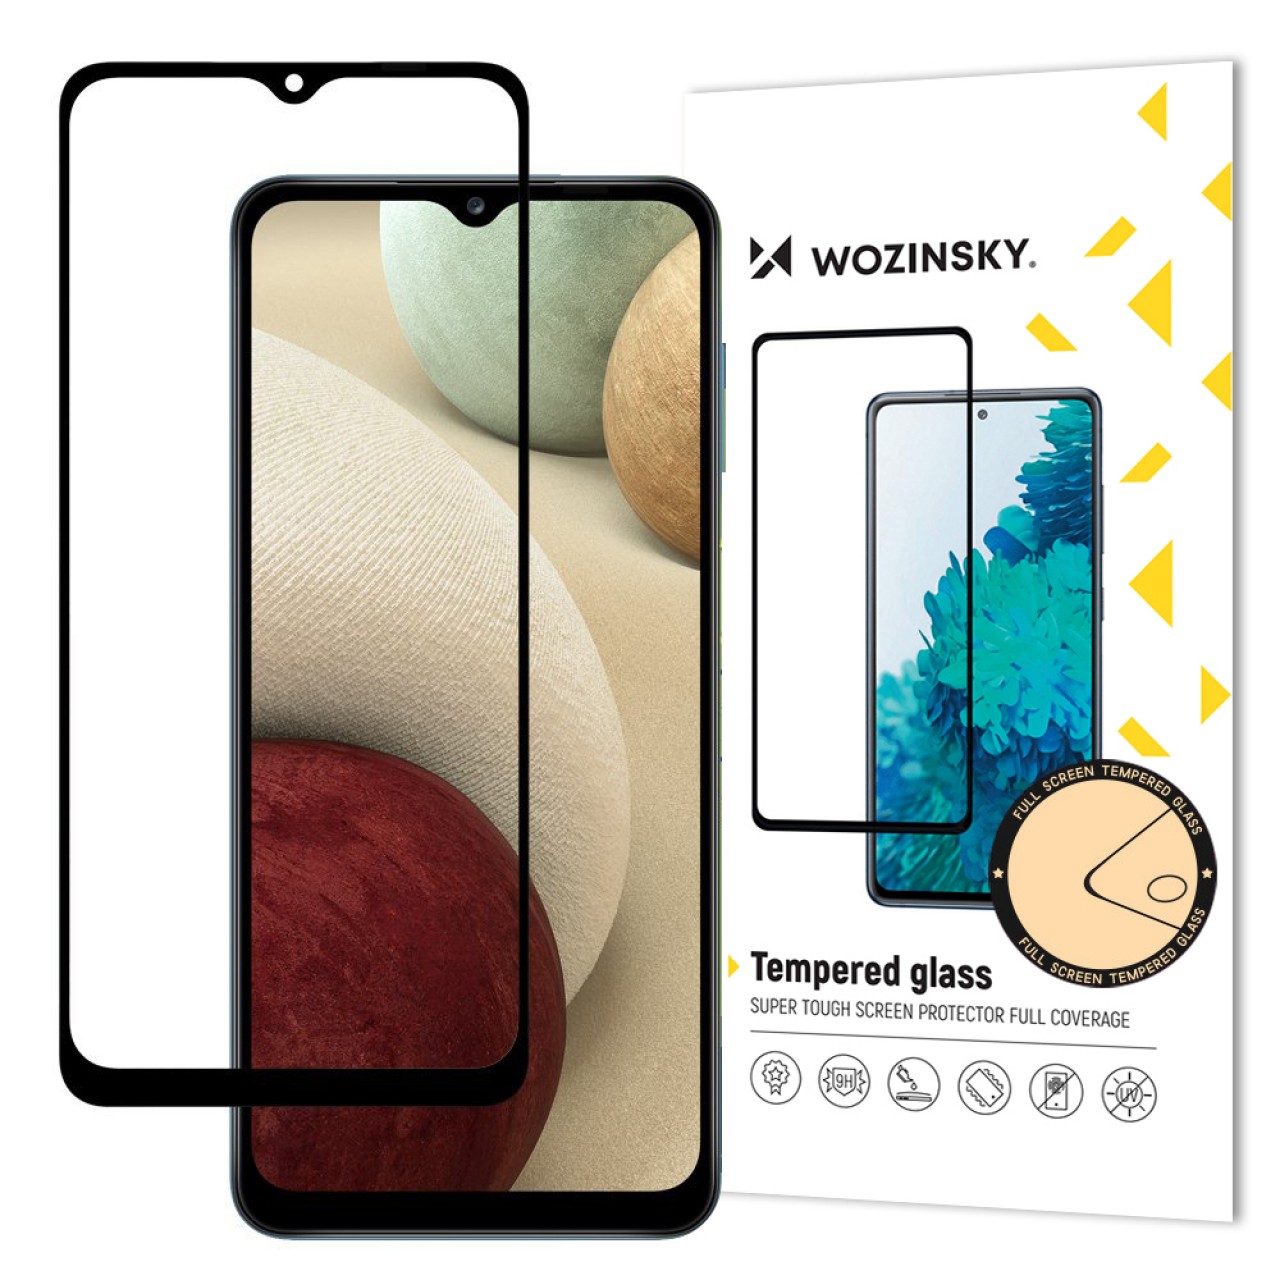 Tempered Glass (Τζάμι) - Προστασία Οθόνης 9D Samsung Galaxy A12 Full Glue Super Tough Screen Protector Full Coveraged with Frame Case Friendly - Μαύρο - 5945 - Wozinsky